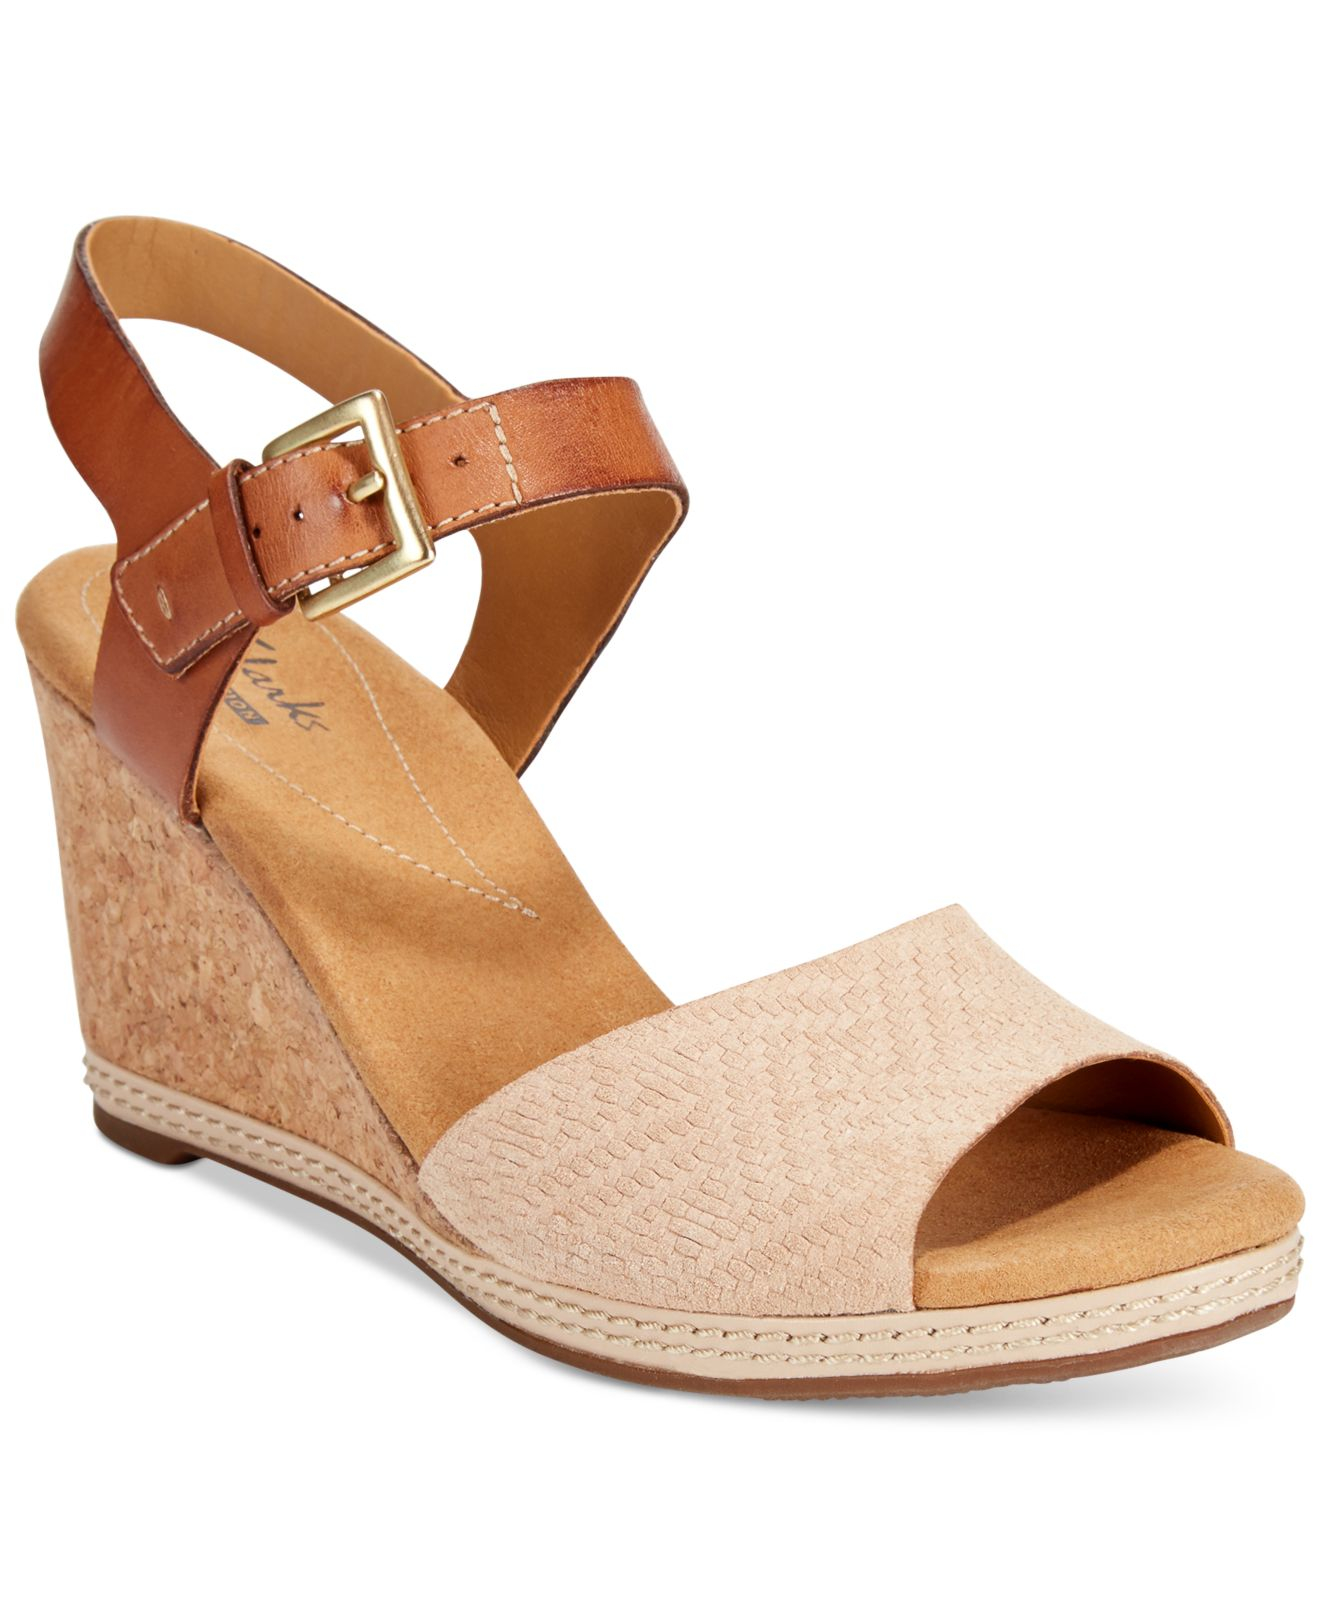 Clarks Collection Women's Helio Jet Wedge Sandals in Natural | Lyst